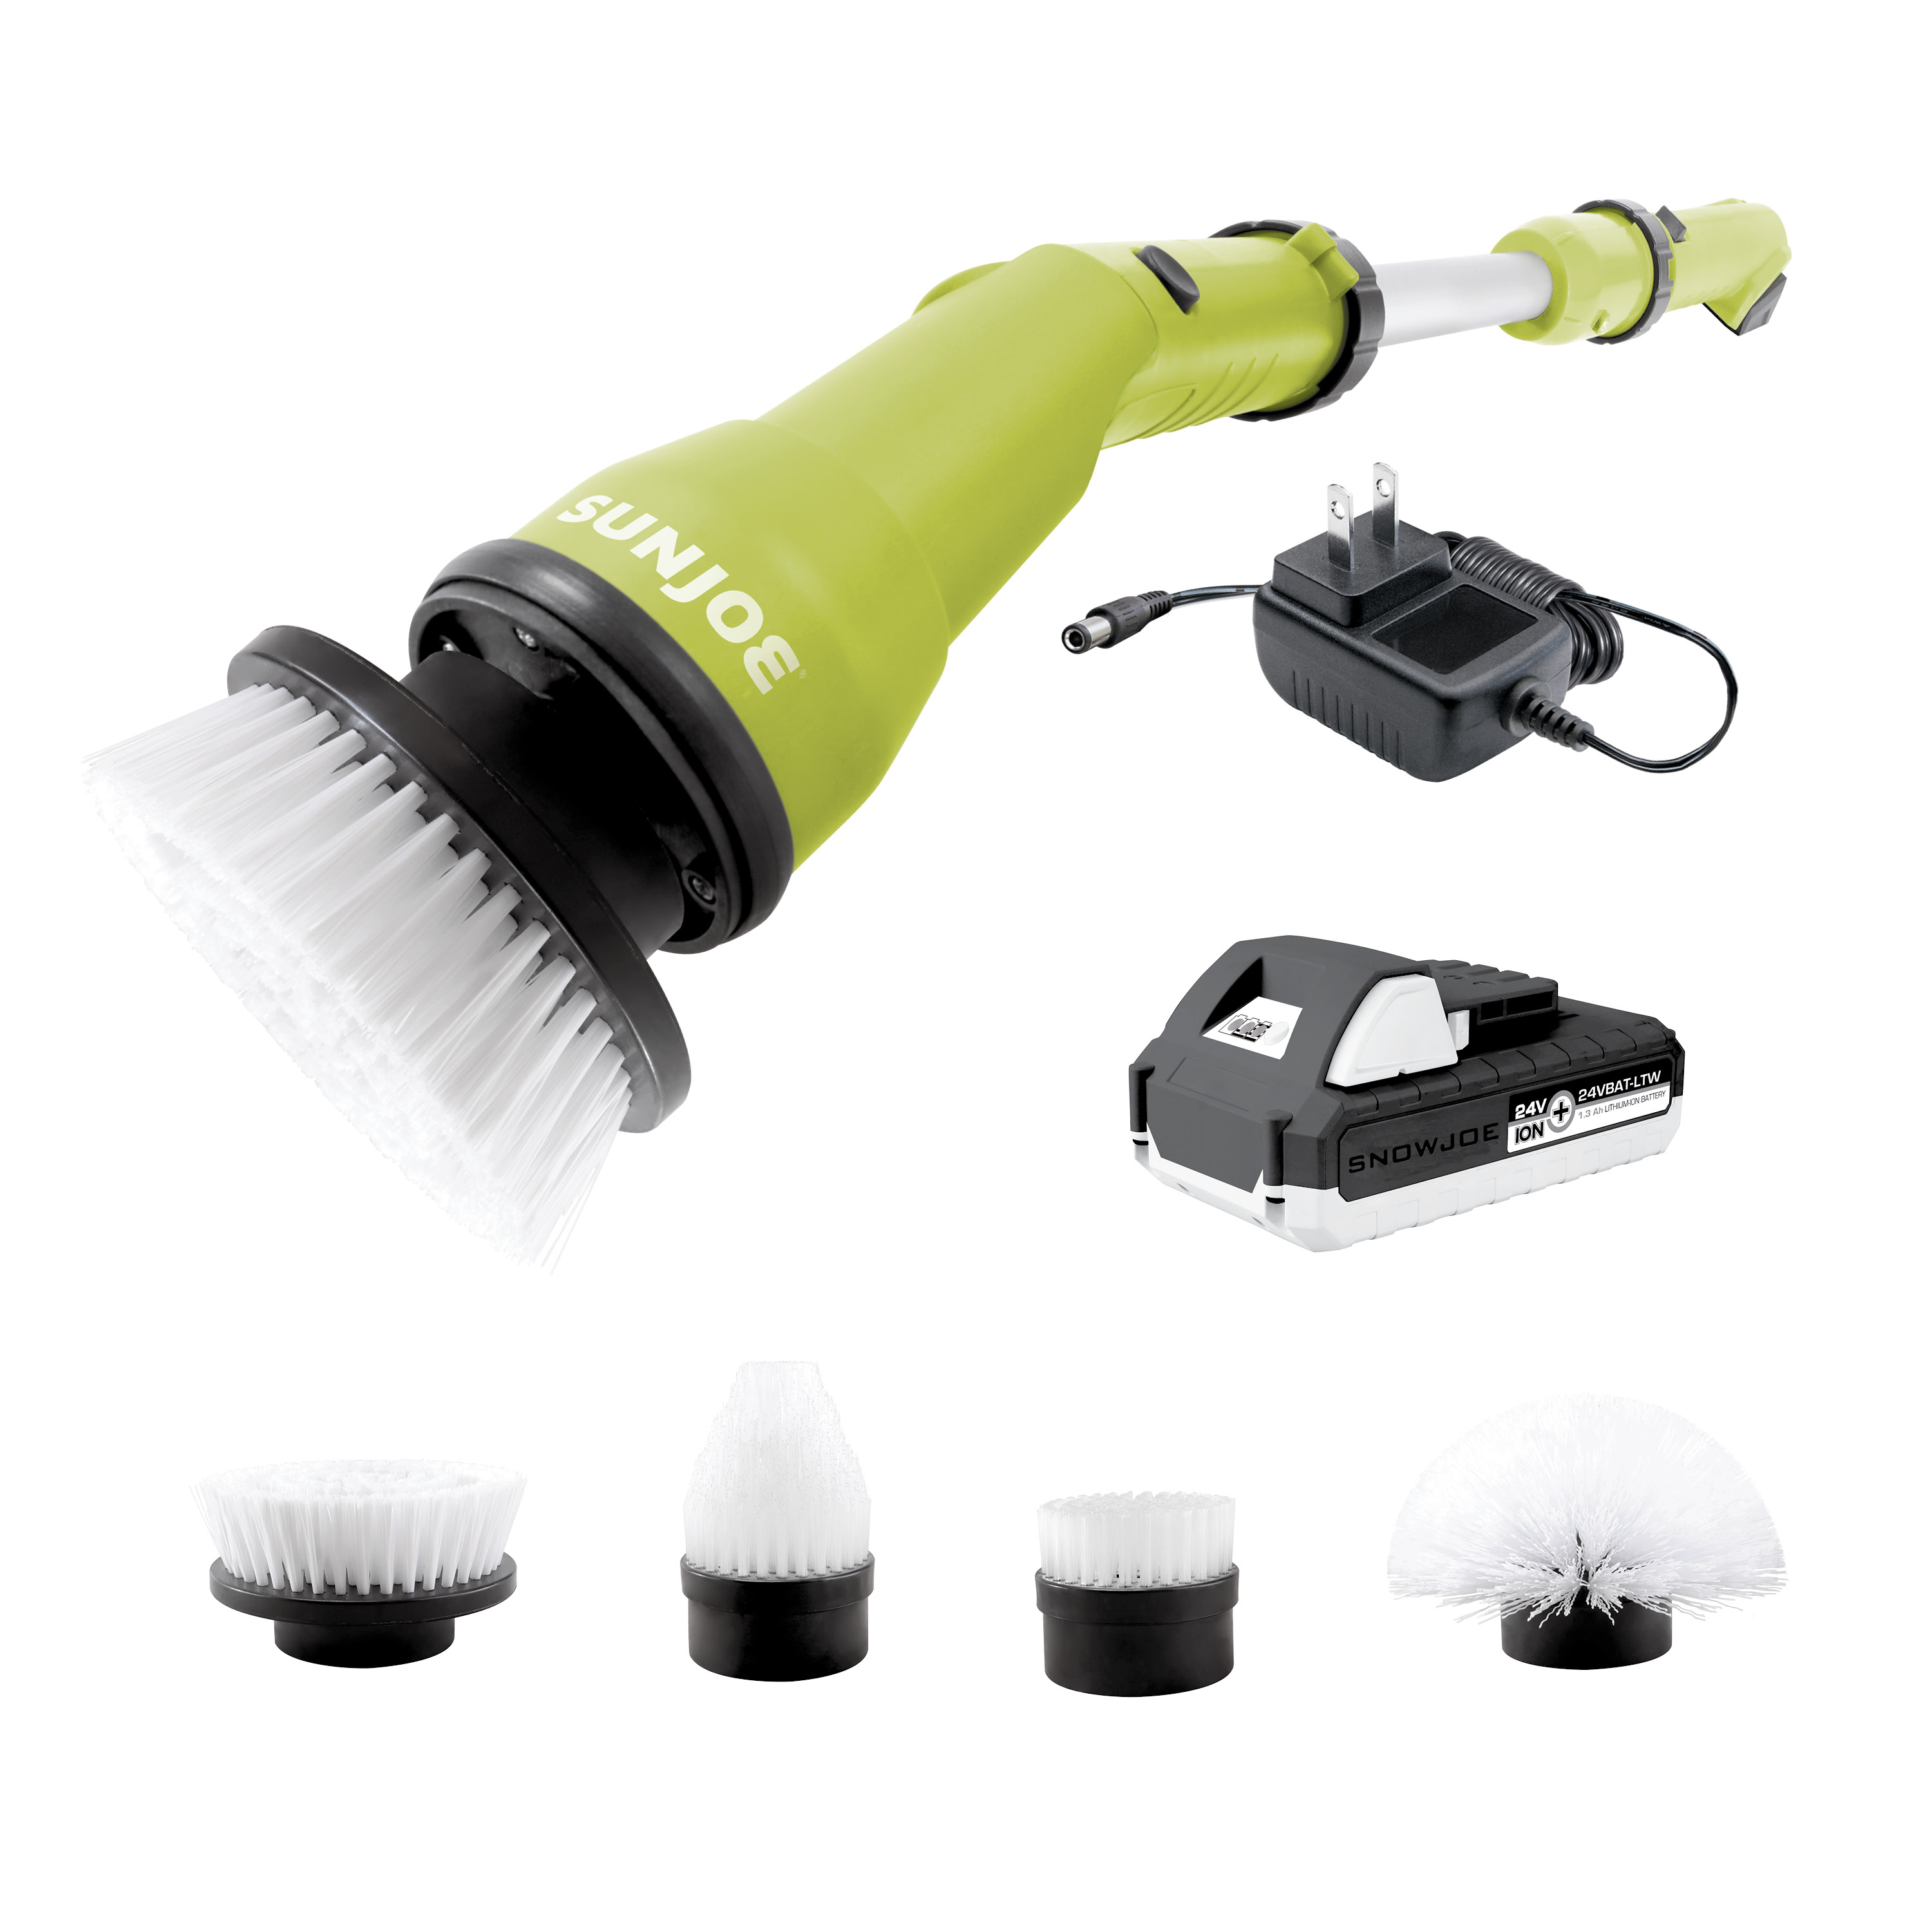 2 Battery Electric Spin Scrubber, 1000RPM Cordless